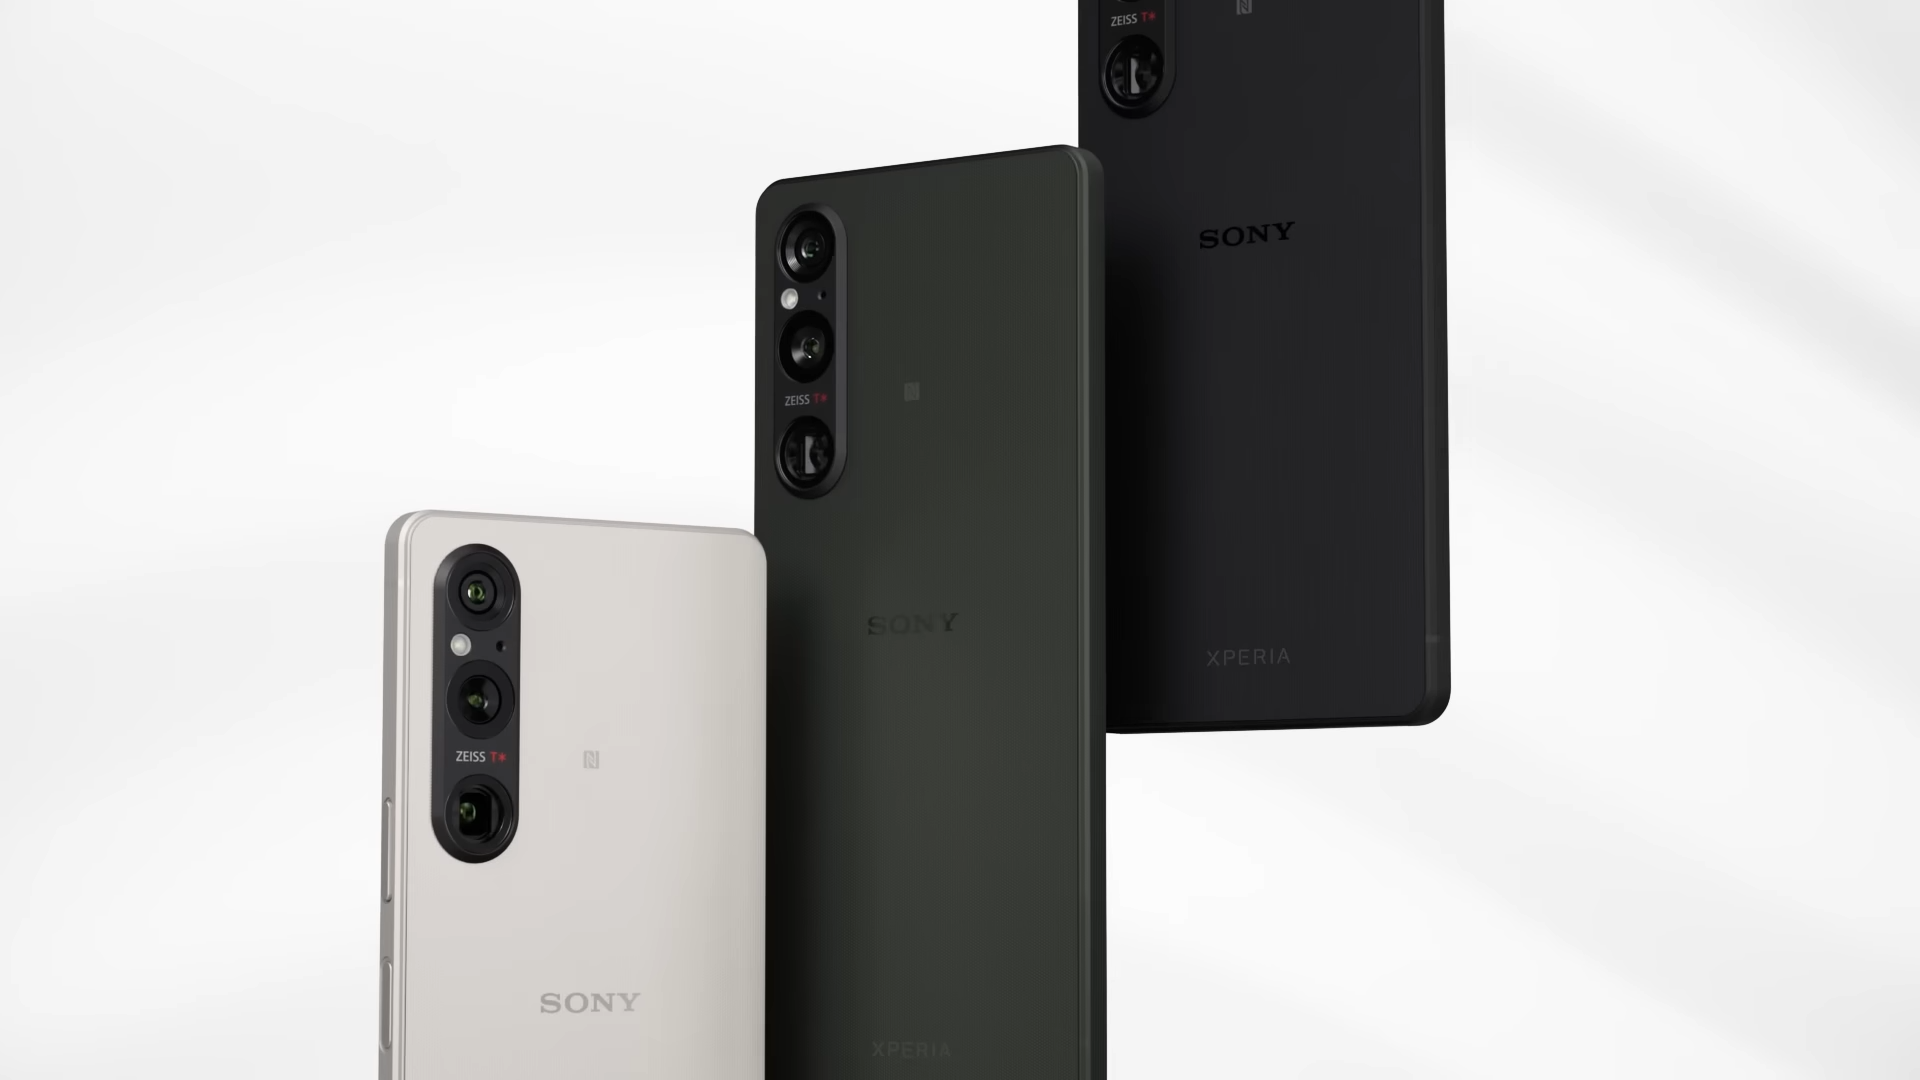 Sony Xperia 1 V launches with top-notch camera tech, 4K OLED